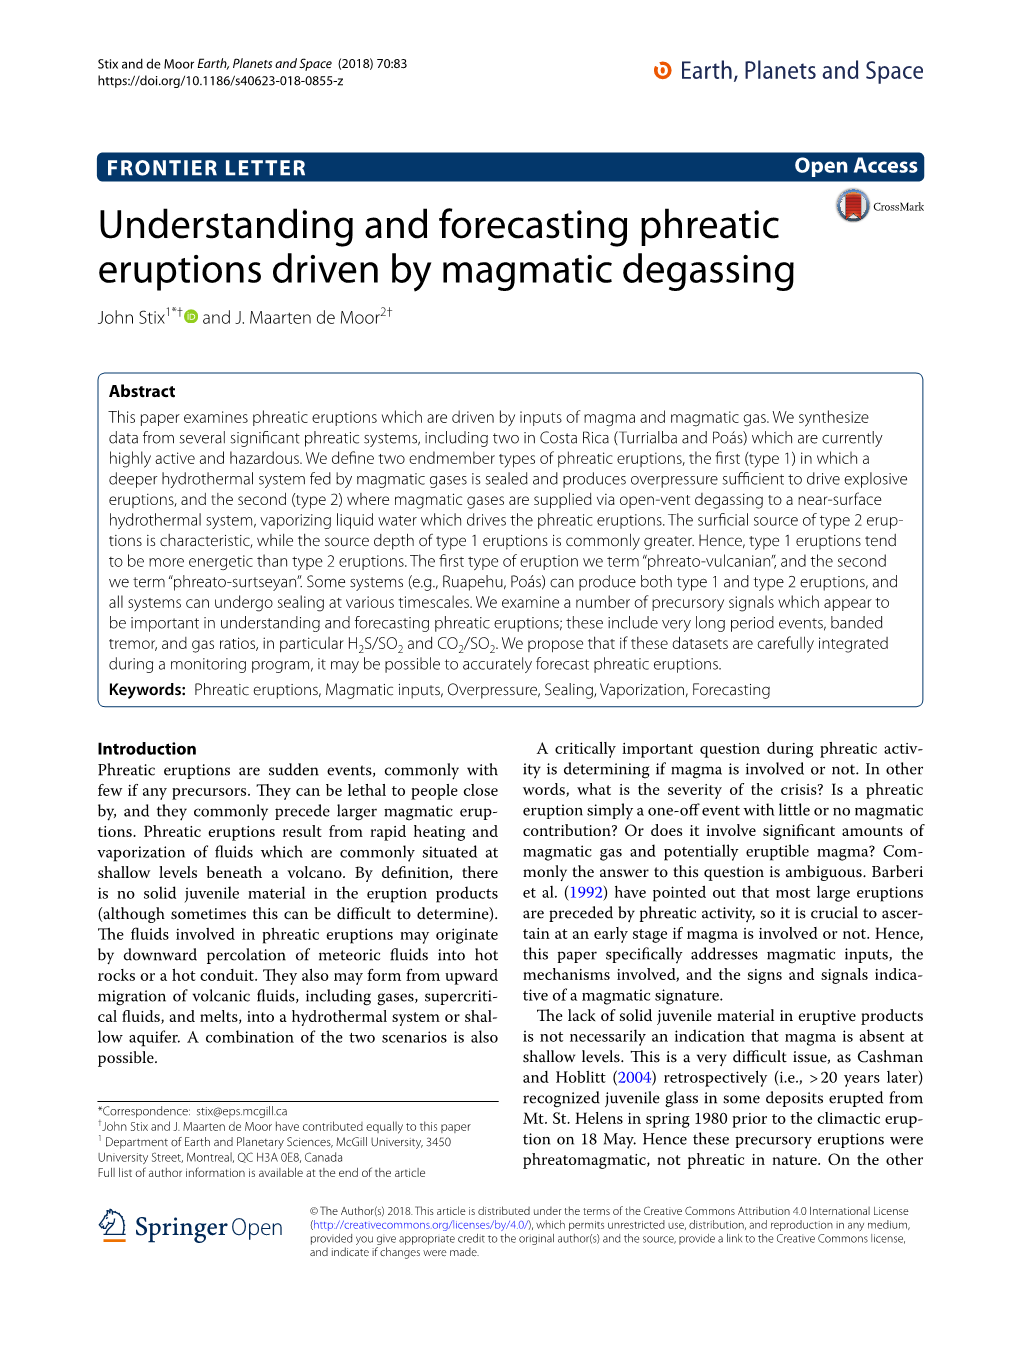 Understanding and Forecasting Phreatic Eruptions Driven by Magmatic Degassing John Stix1*† and J